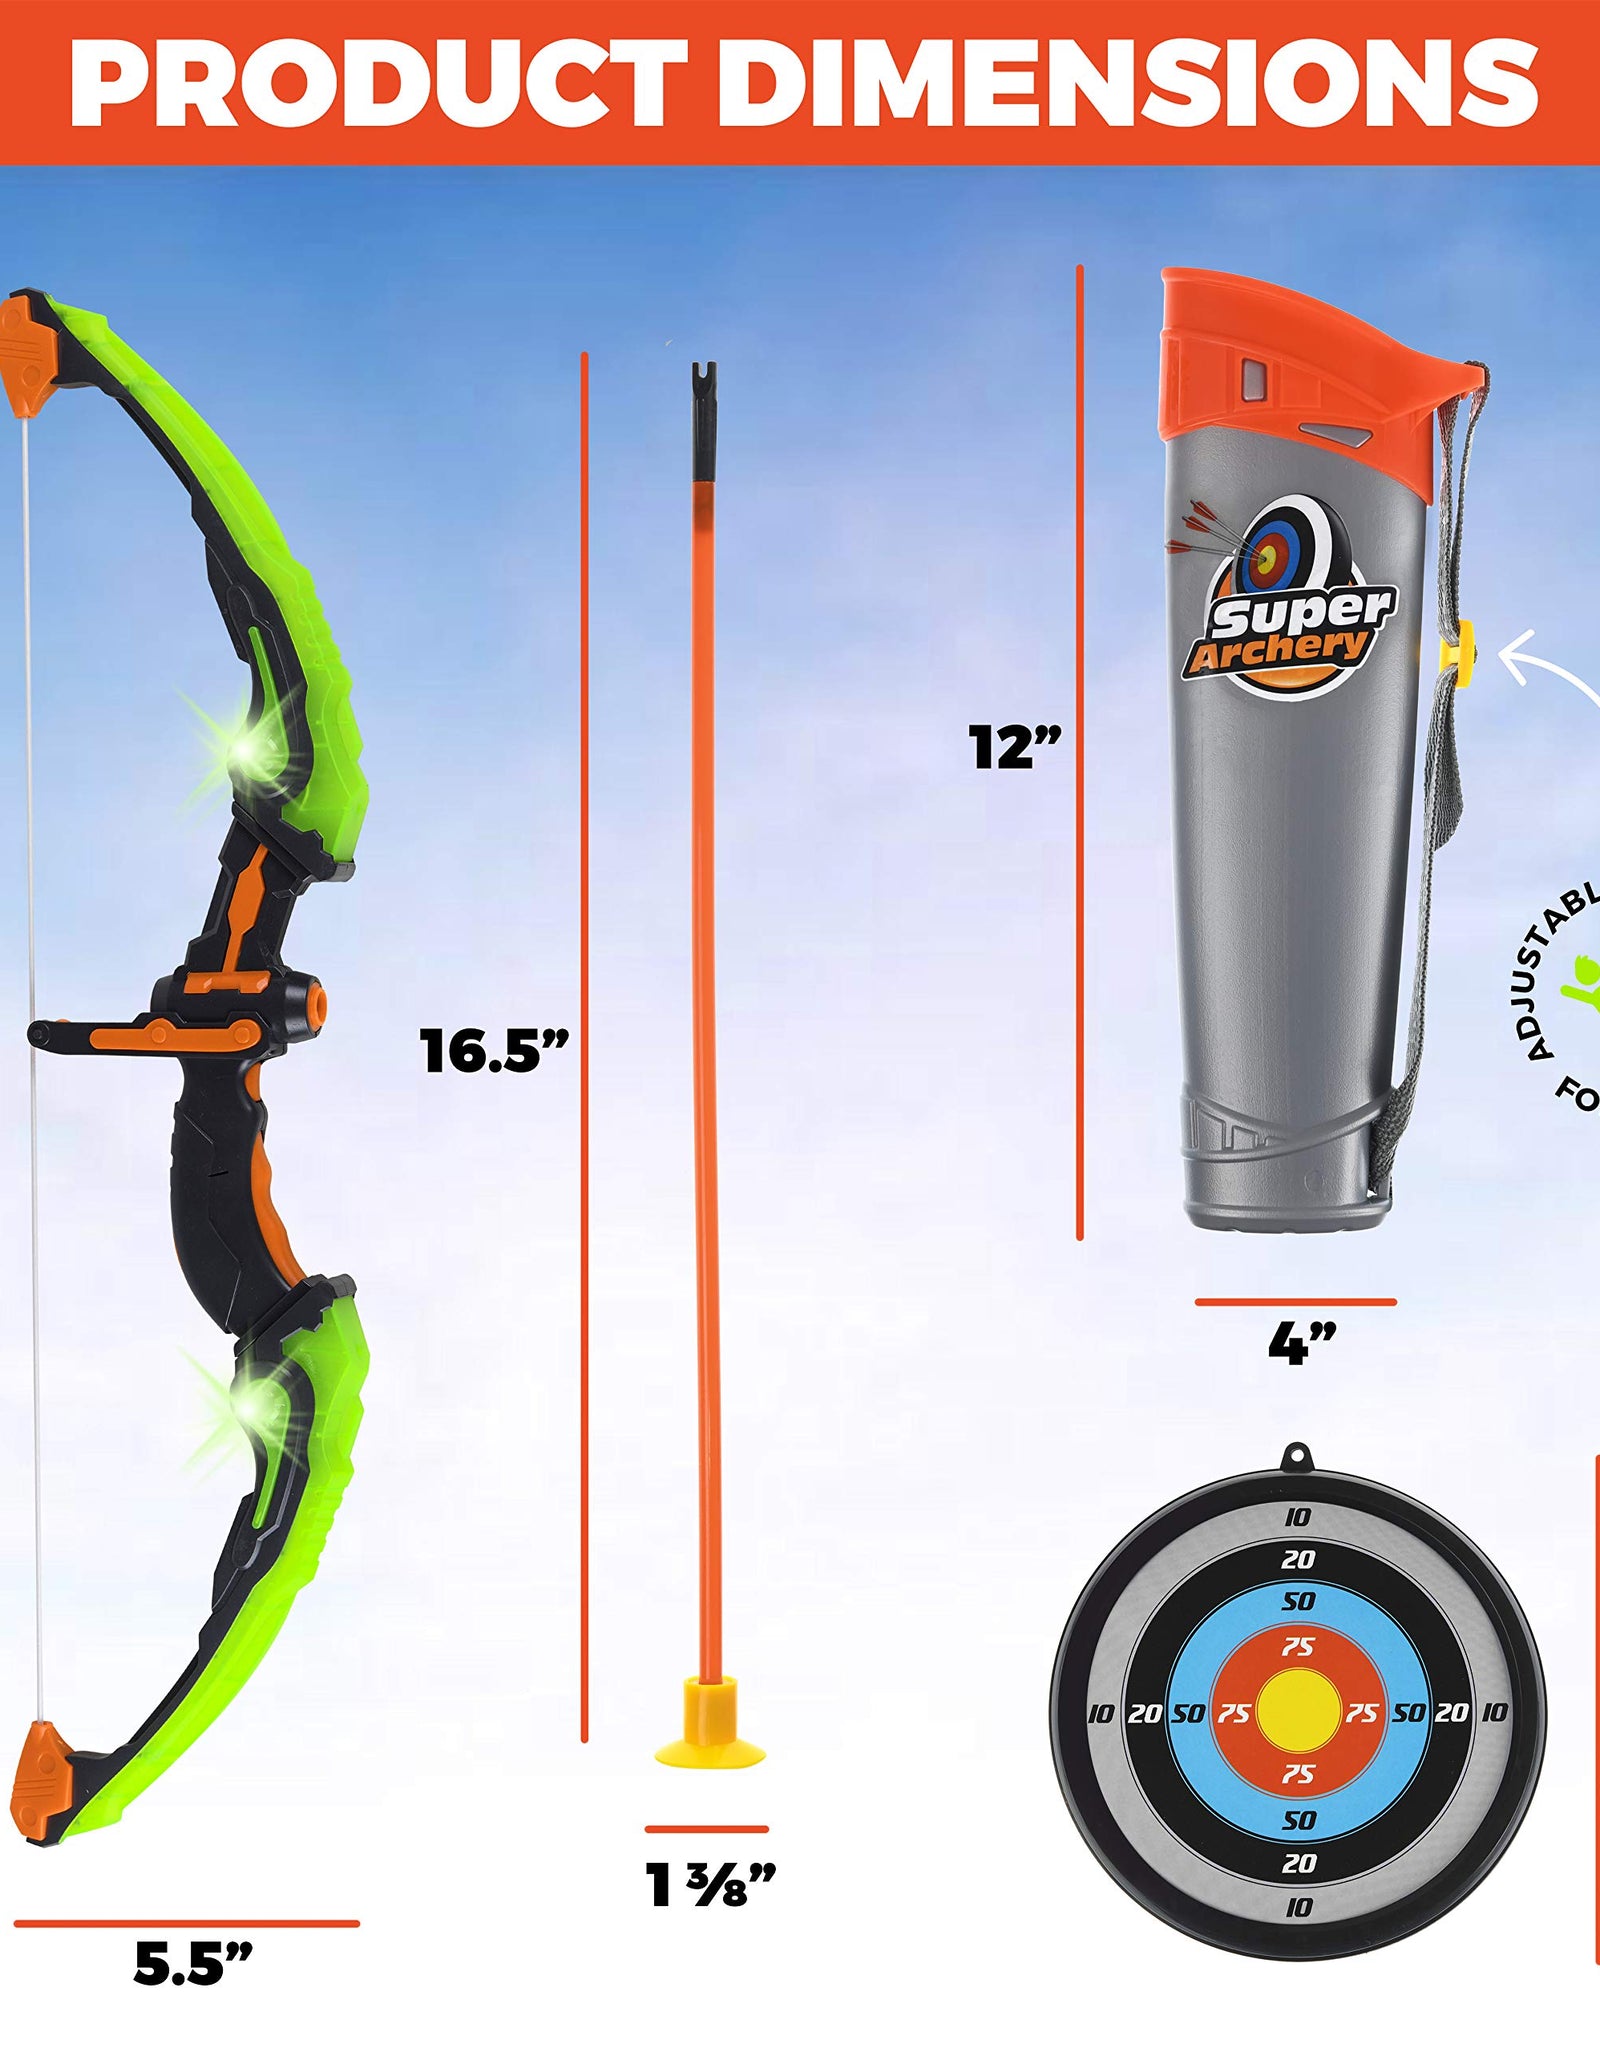 Toyvelt Bow and Arrow Set for Kids -Light Up Archery Toy Set -Includes 6 Suction Cup Arrows, Target & Quiver - for Boys & Girls Ages 3 -12 Years Old (Green)